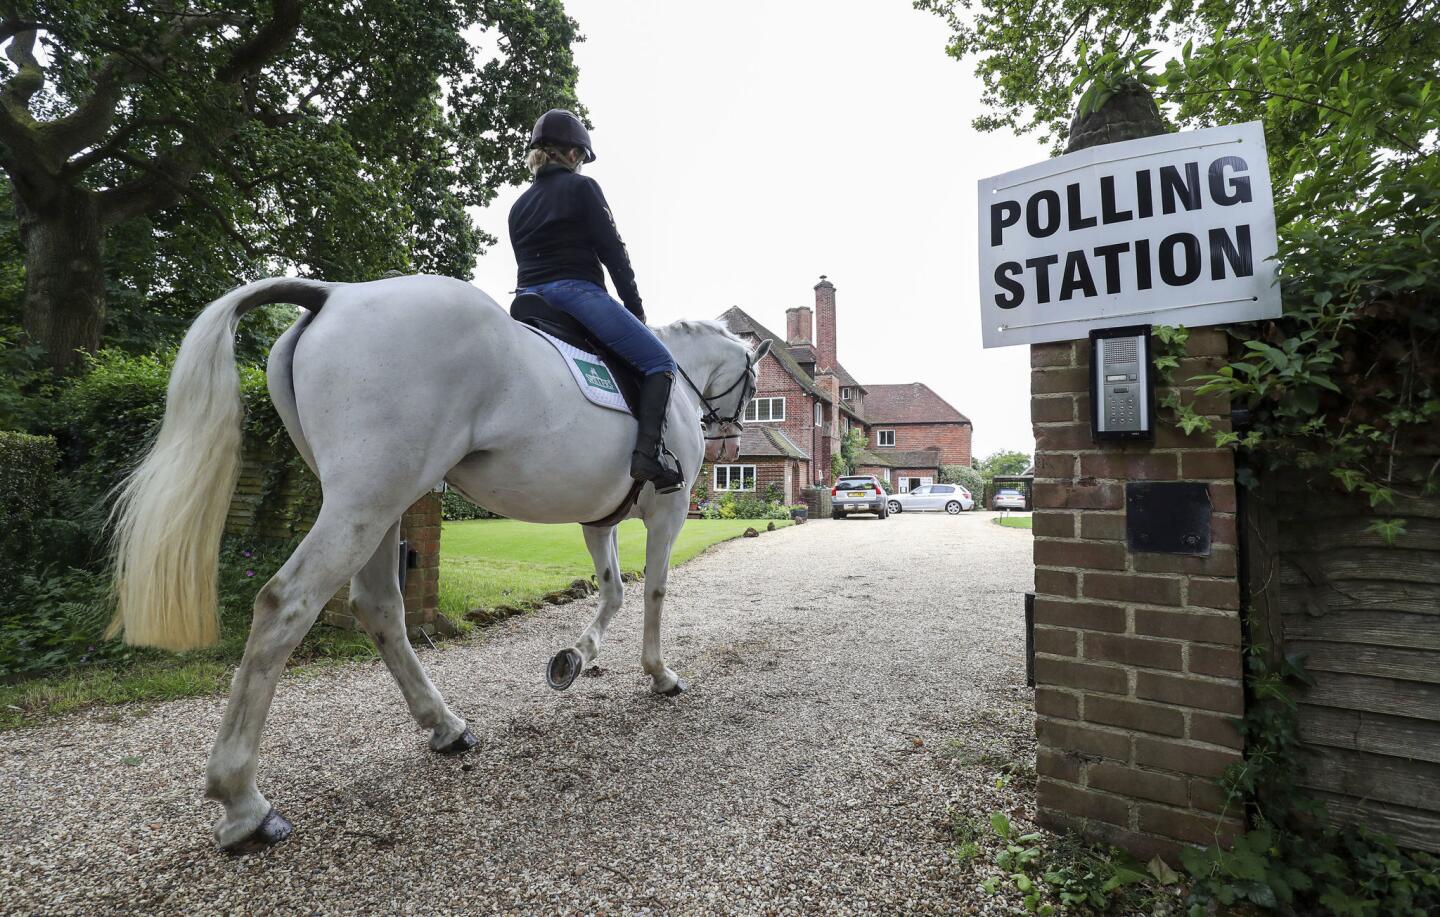 Sophie Allison returns to the stables on her horse Splash at the private residence Three Oaks in Bramshill, which is being used a polling station in Hampshire, England, on June 8, 2017.